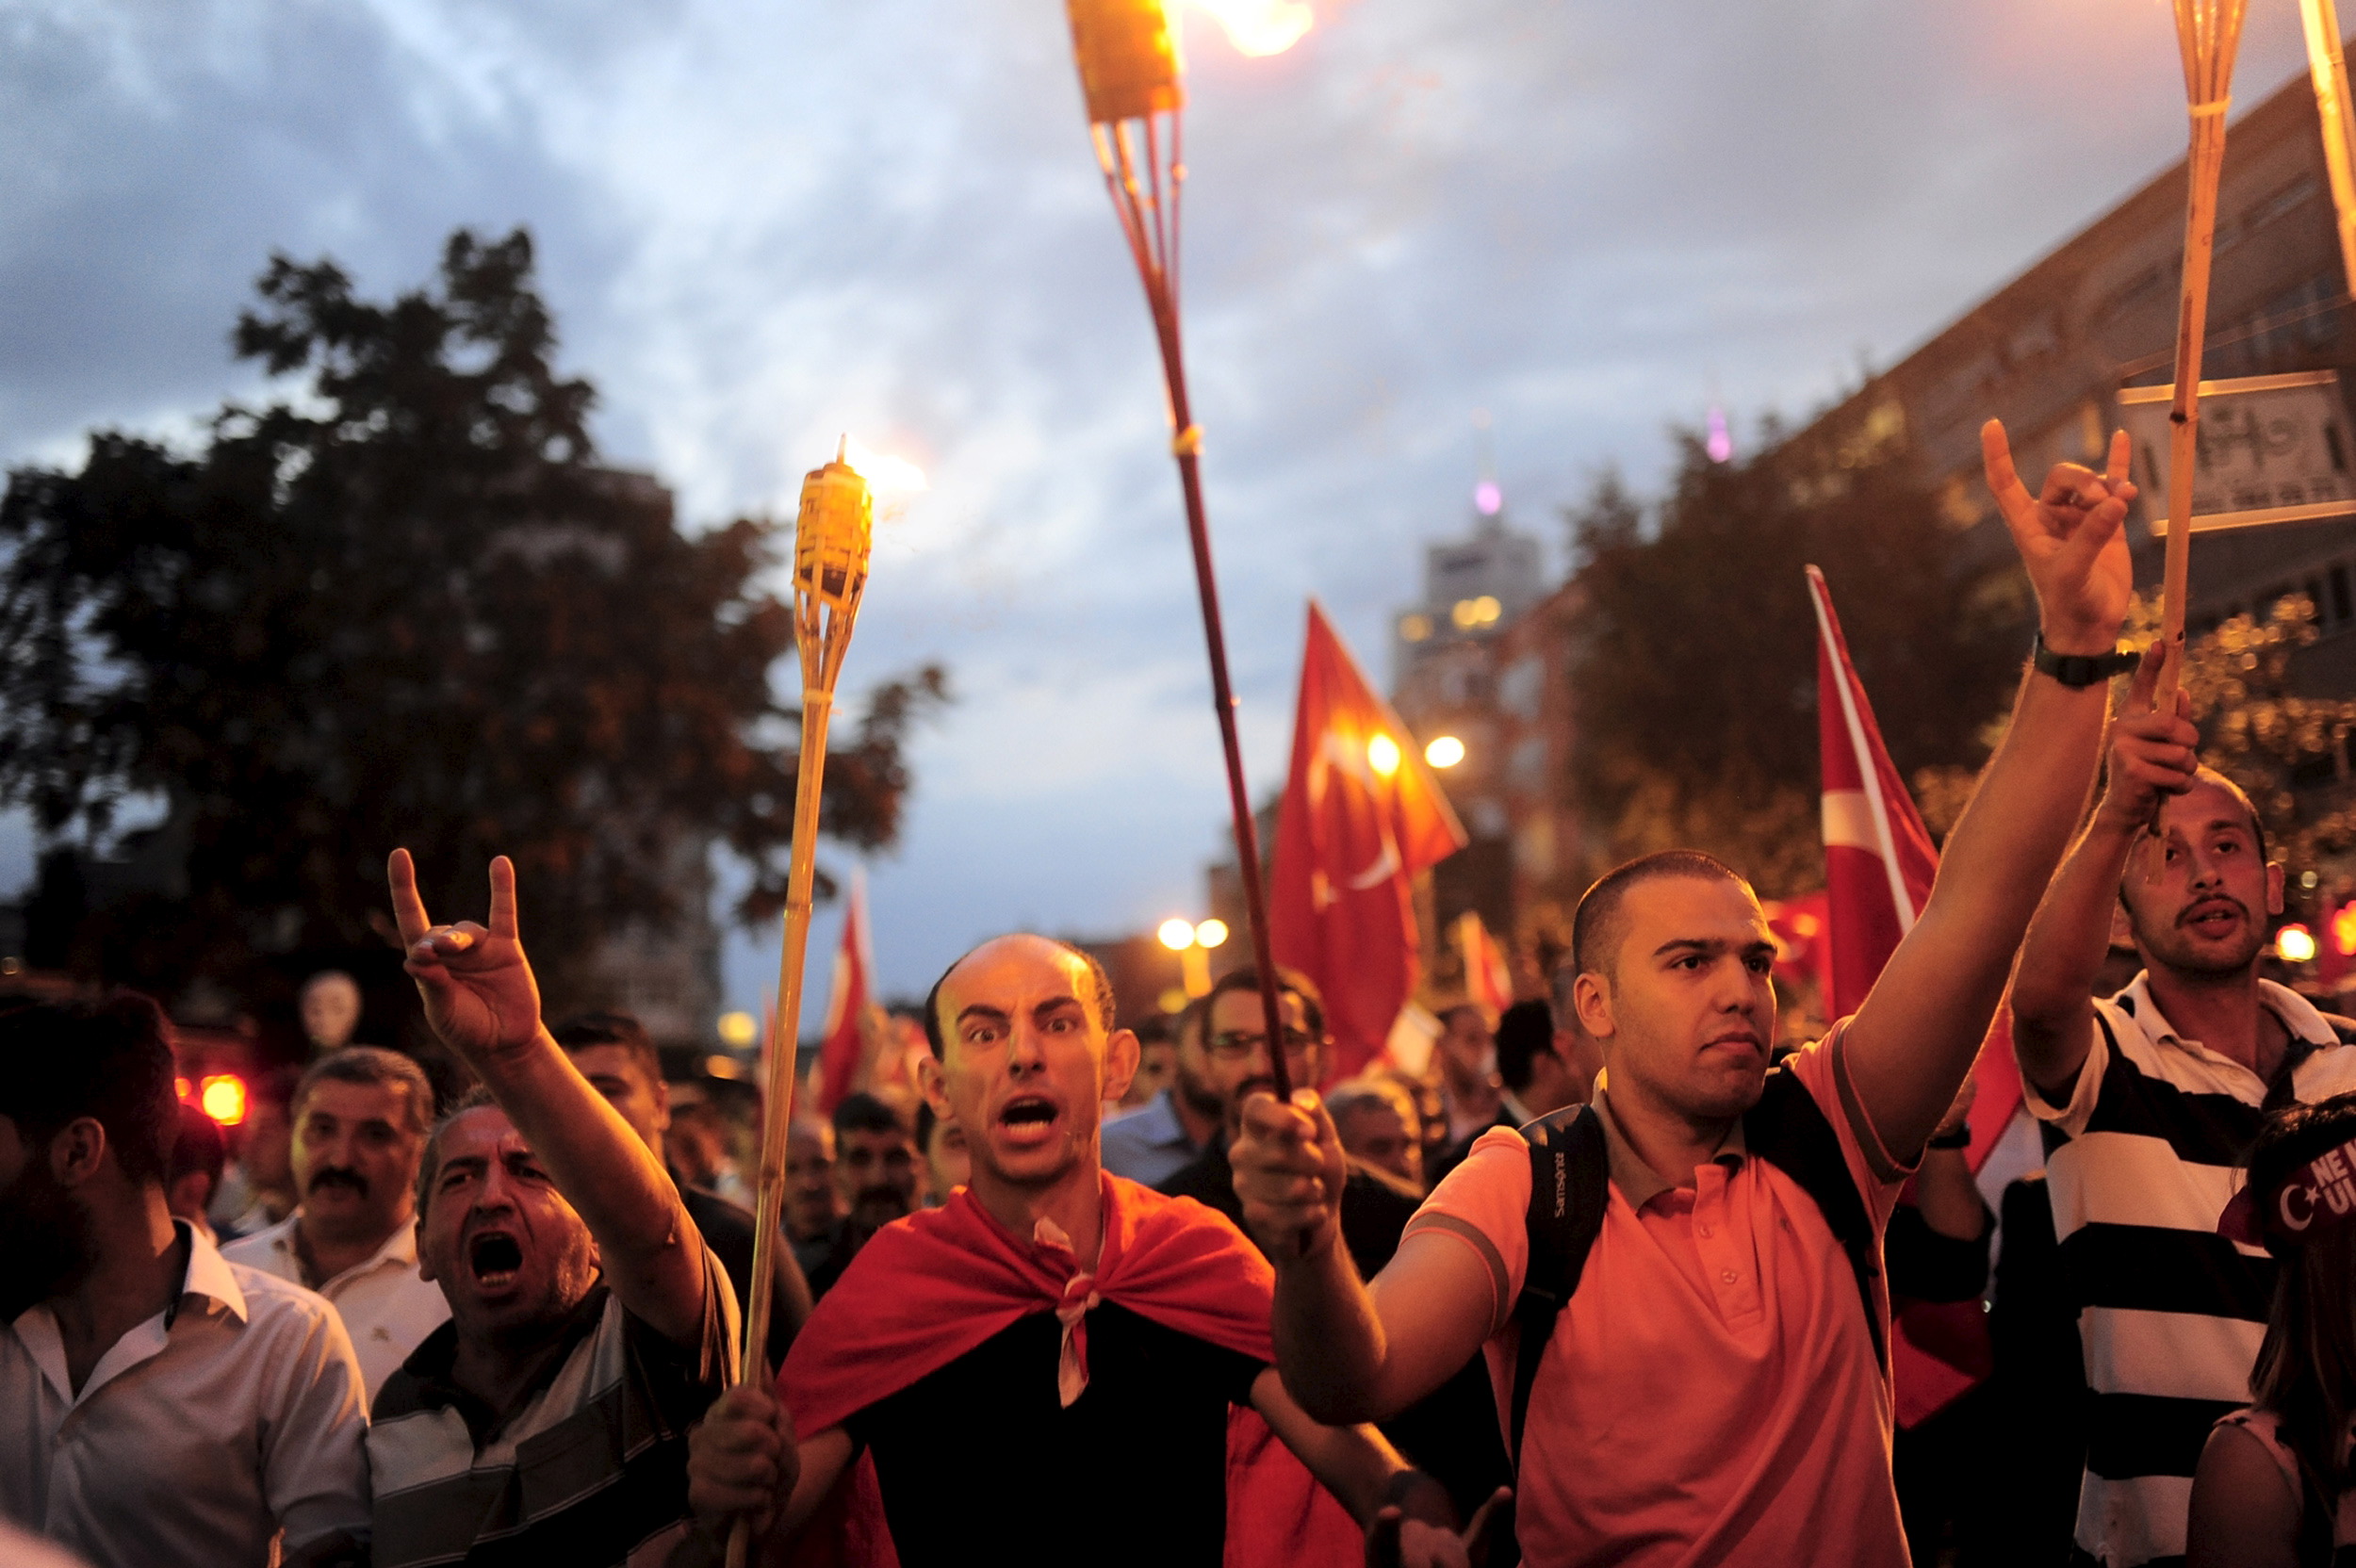 Supporters of ultra-nationalist groups shout slogans during a protest against recent Kurdish militant attacks on Turkish security forces, in Istanbul, Turkey, September 8, 2015. (Yagiz Karahan — Reuters)